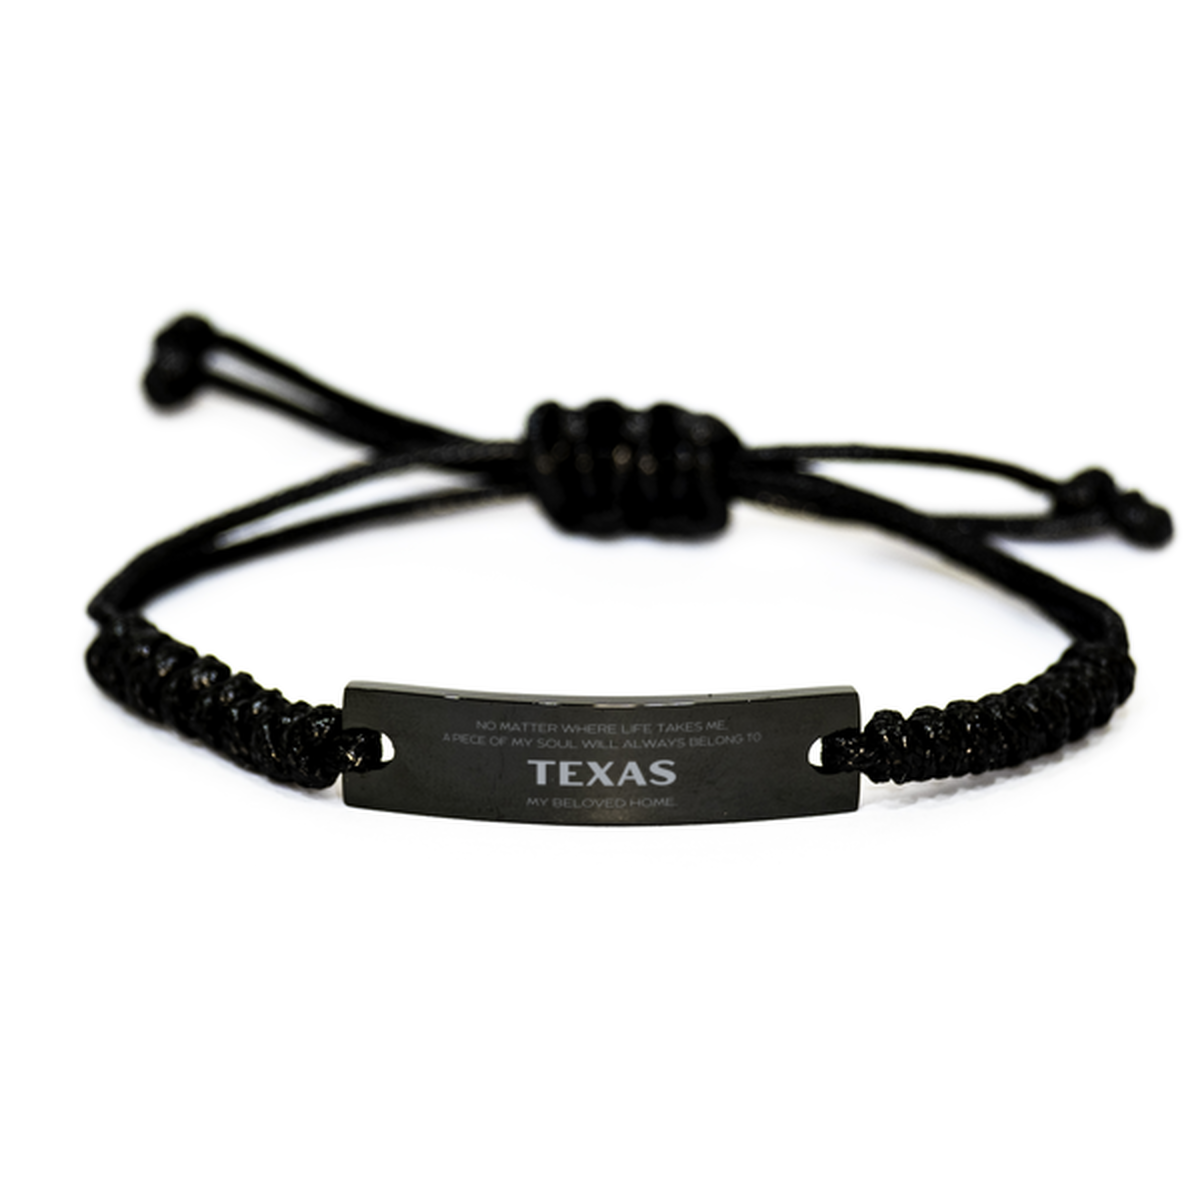 Love Texas State Gifts, My soul will always belong to Texas, Proud Black Rope Bracelet, Birthday Unique Gifts For Texas Men, Women, Friends